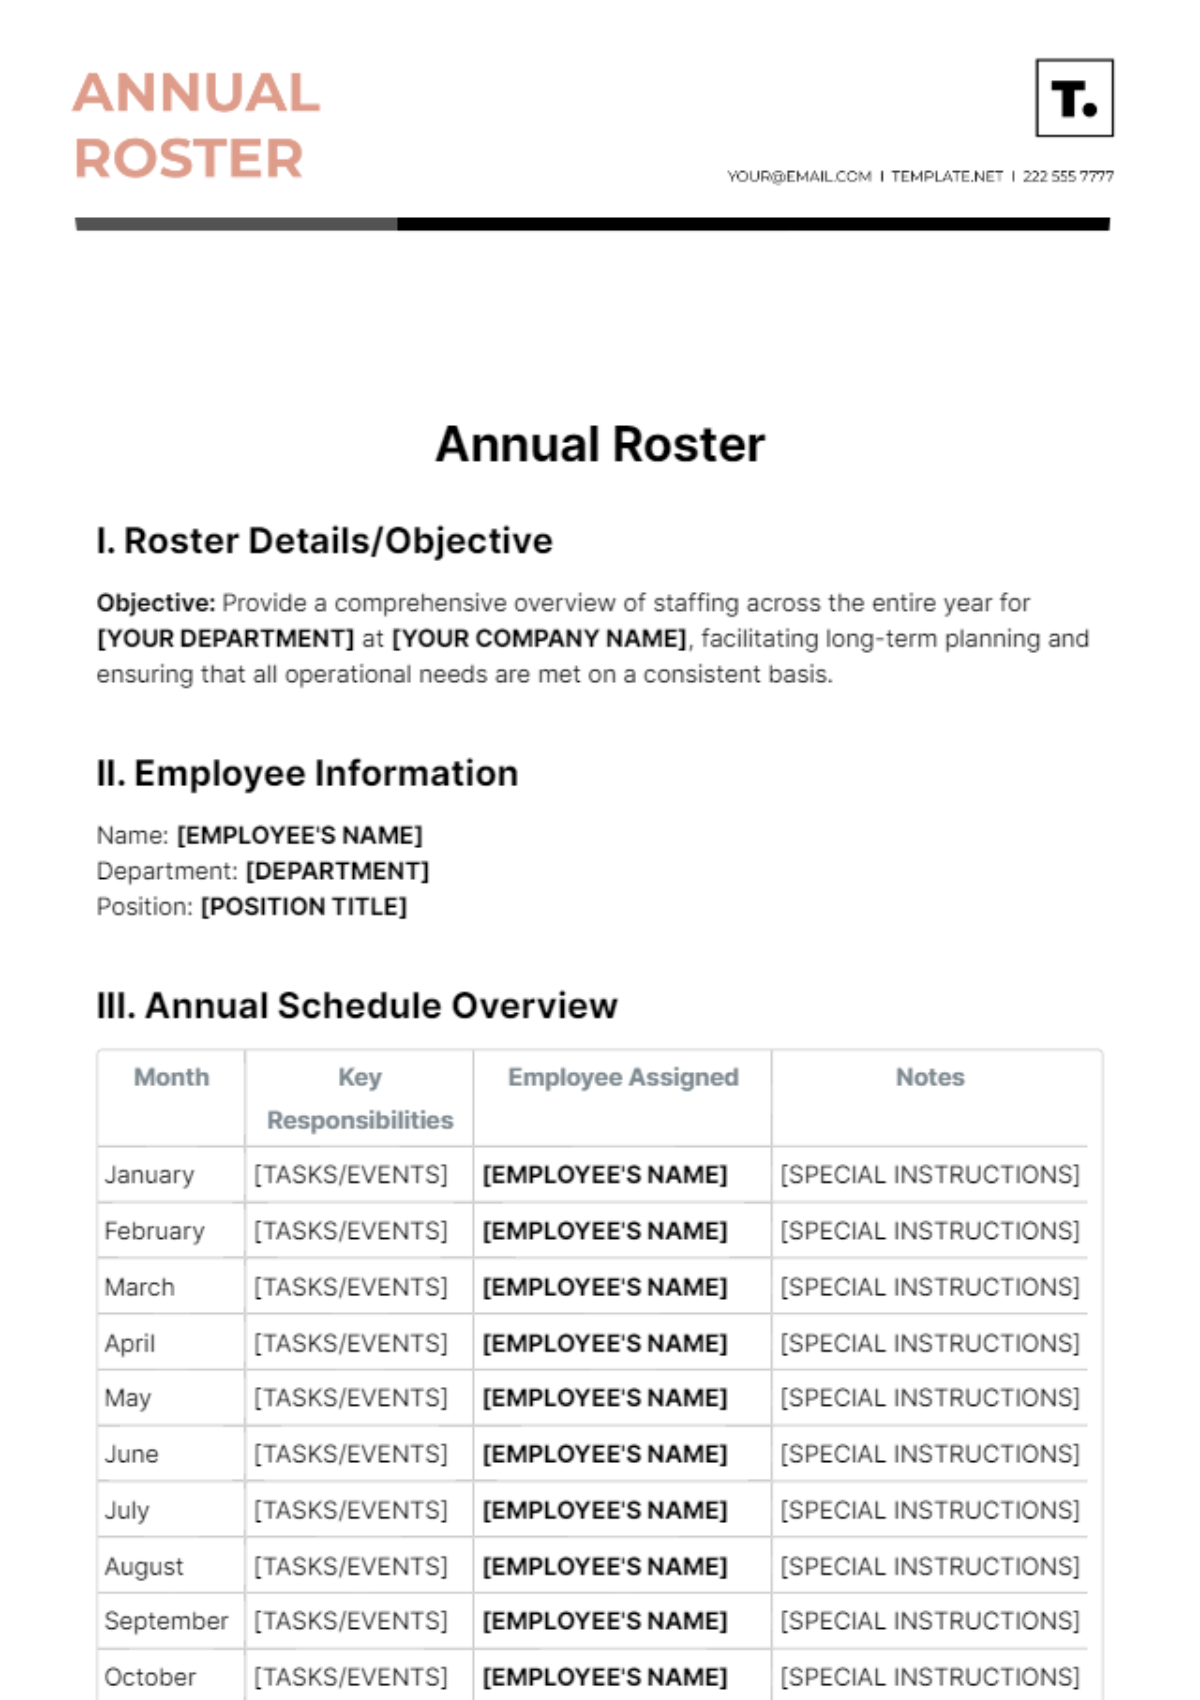 Annual Roster Template